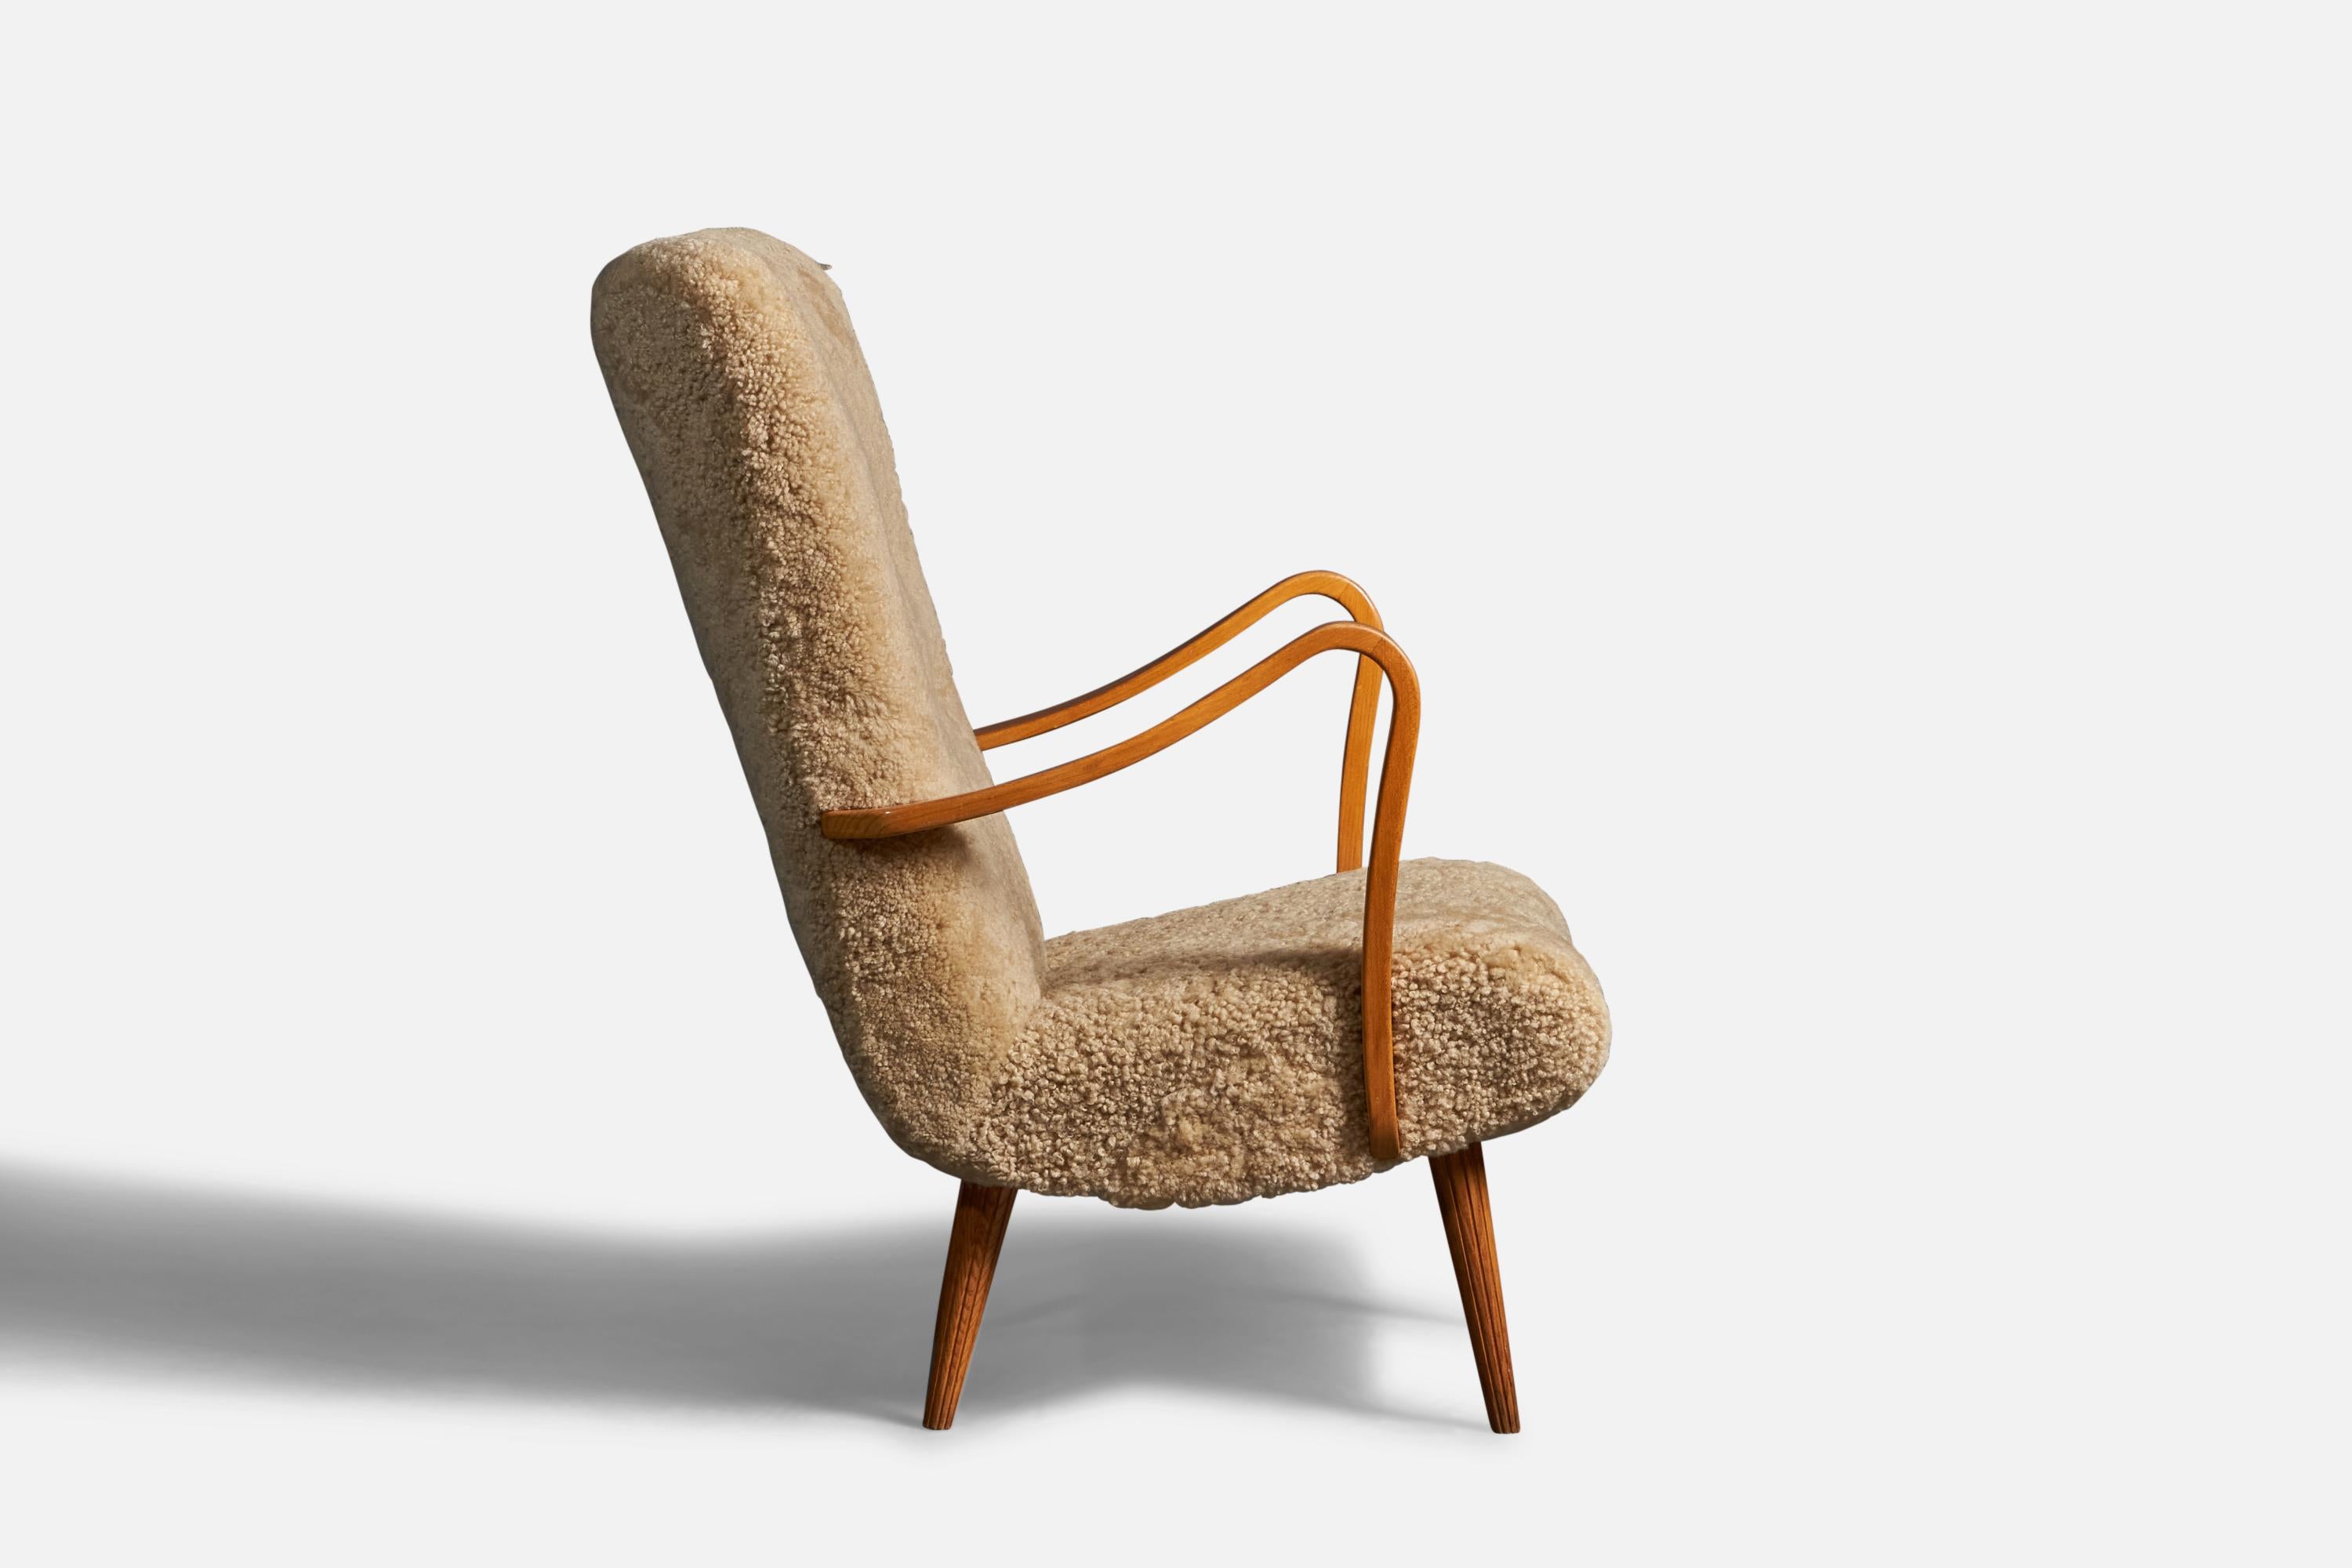 A wood and shearling lounge chair, design attributed to Carl Gustaf Hiort Af Ornäs, Finland, c. 1950s.

Seat height: 17